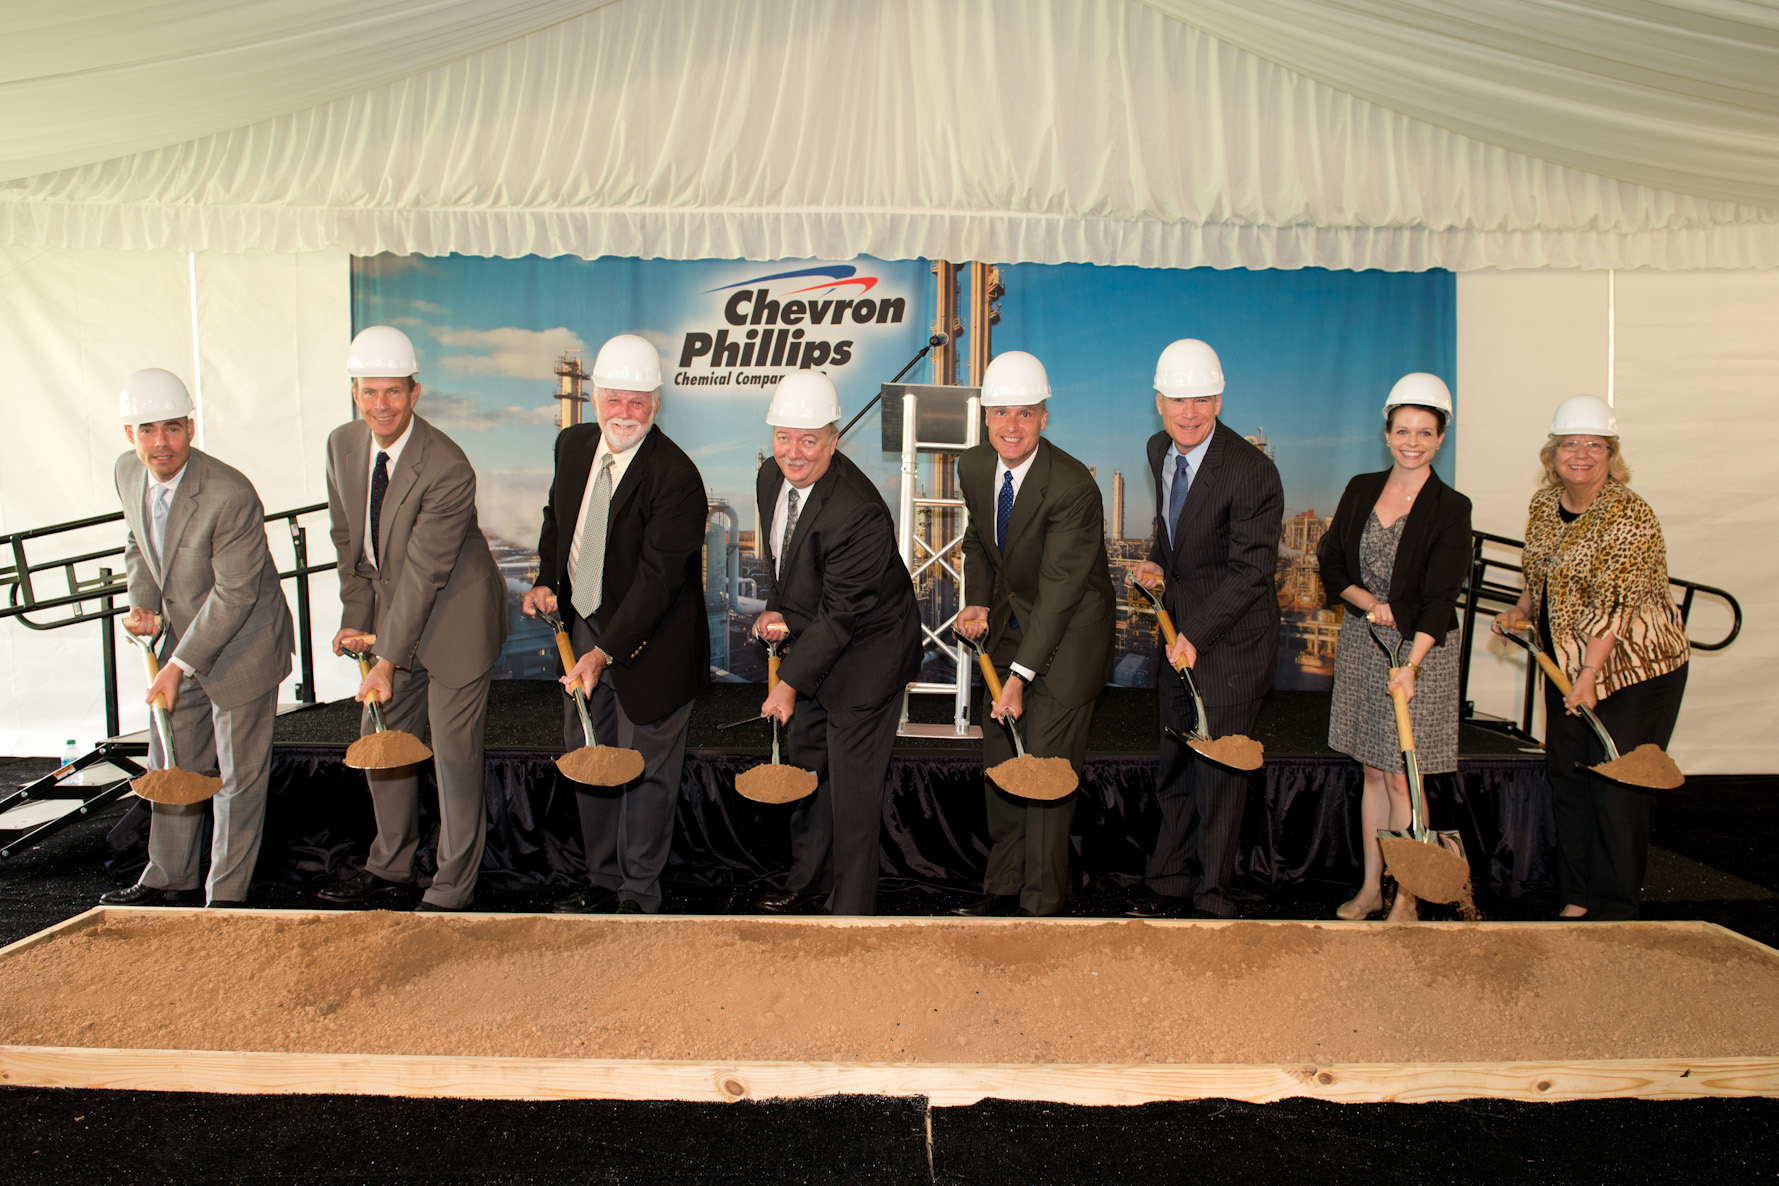 Chevron Phillips Chemical breaks ground on the U.S. Gulf Coast Petrochemicals Project.